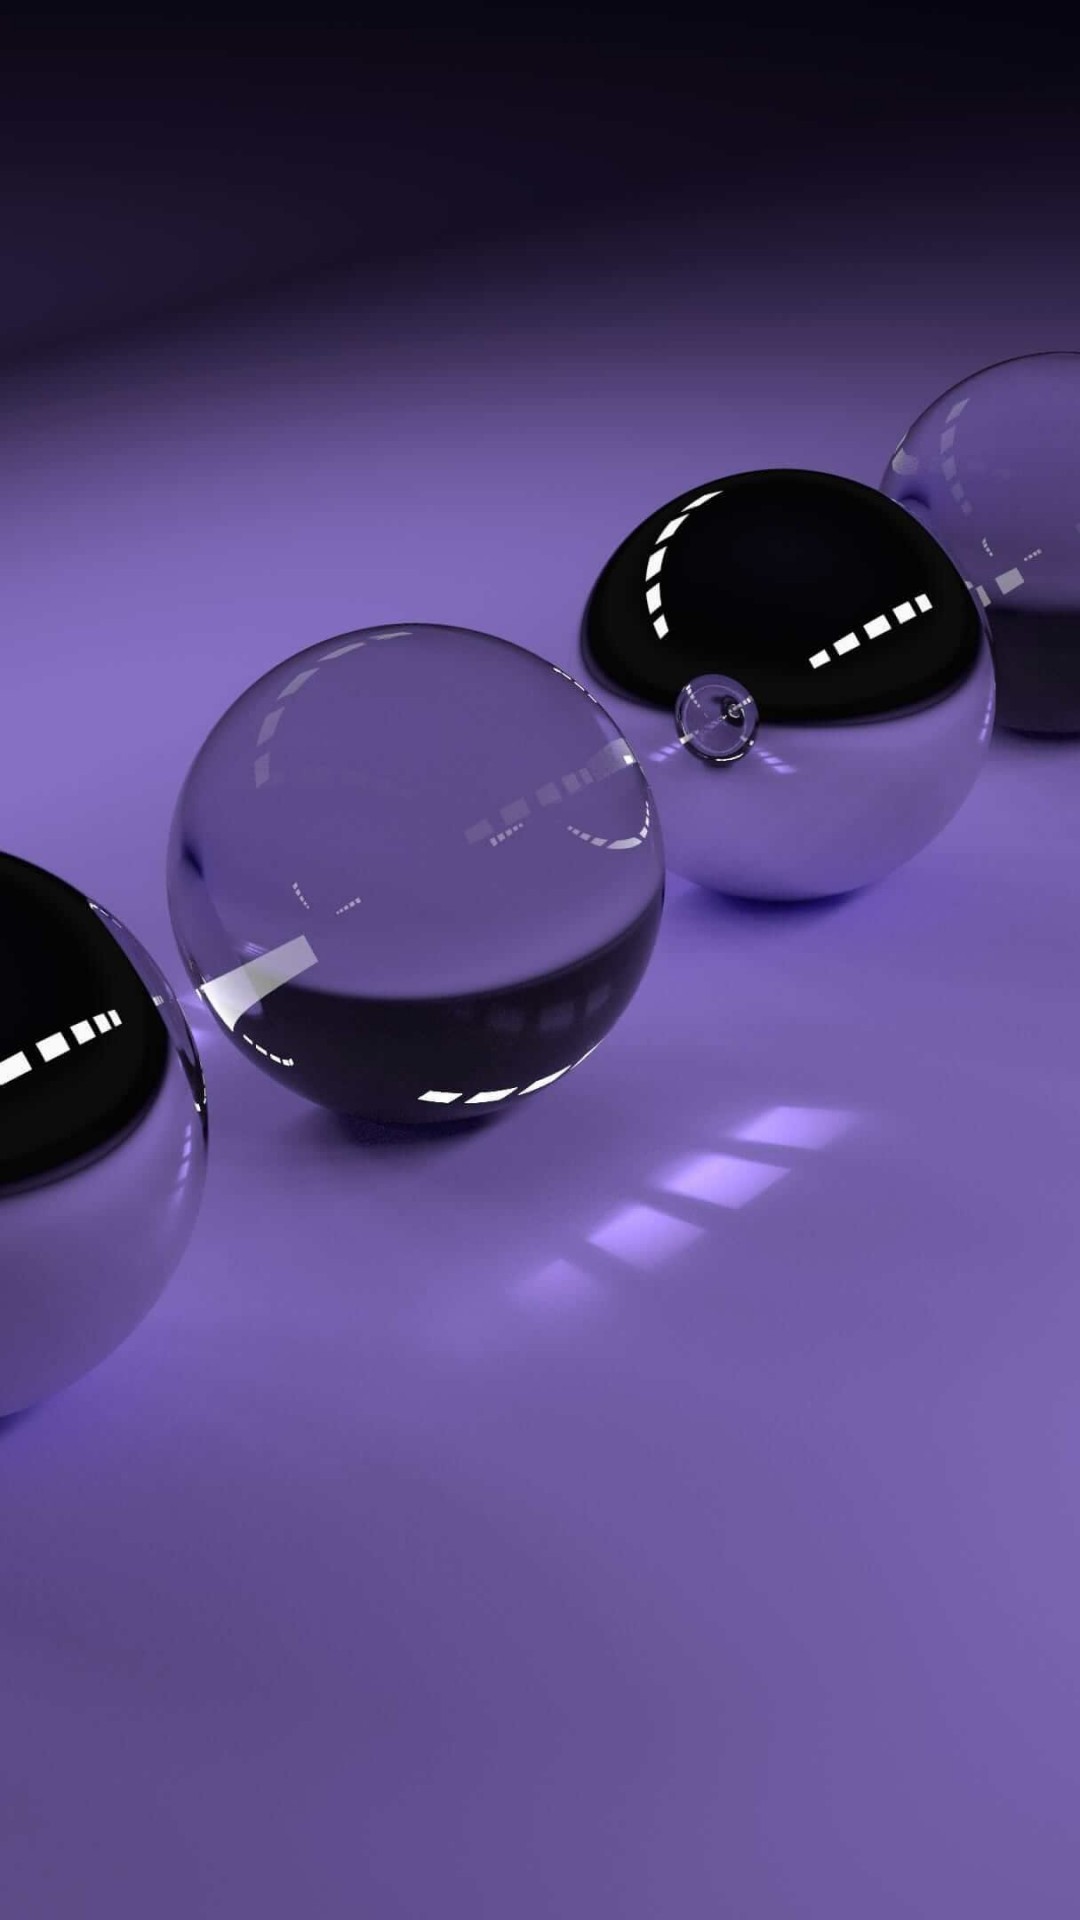 3D Glossy Spheres Wallpaper for SONY Xperia Z1